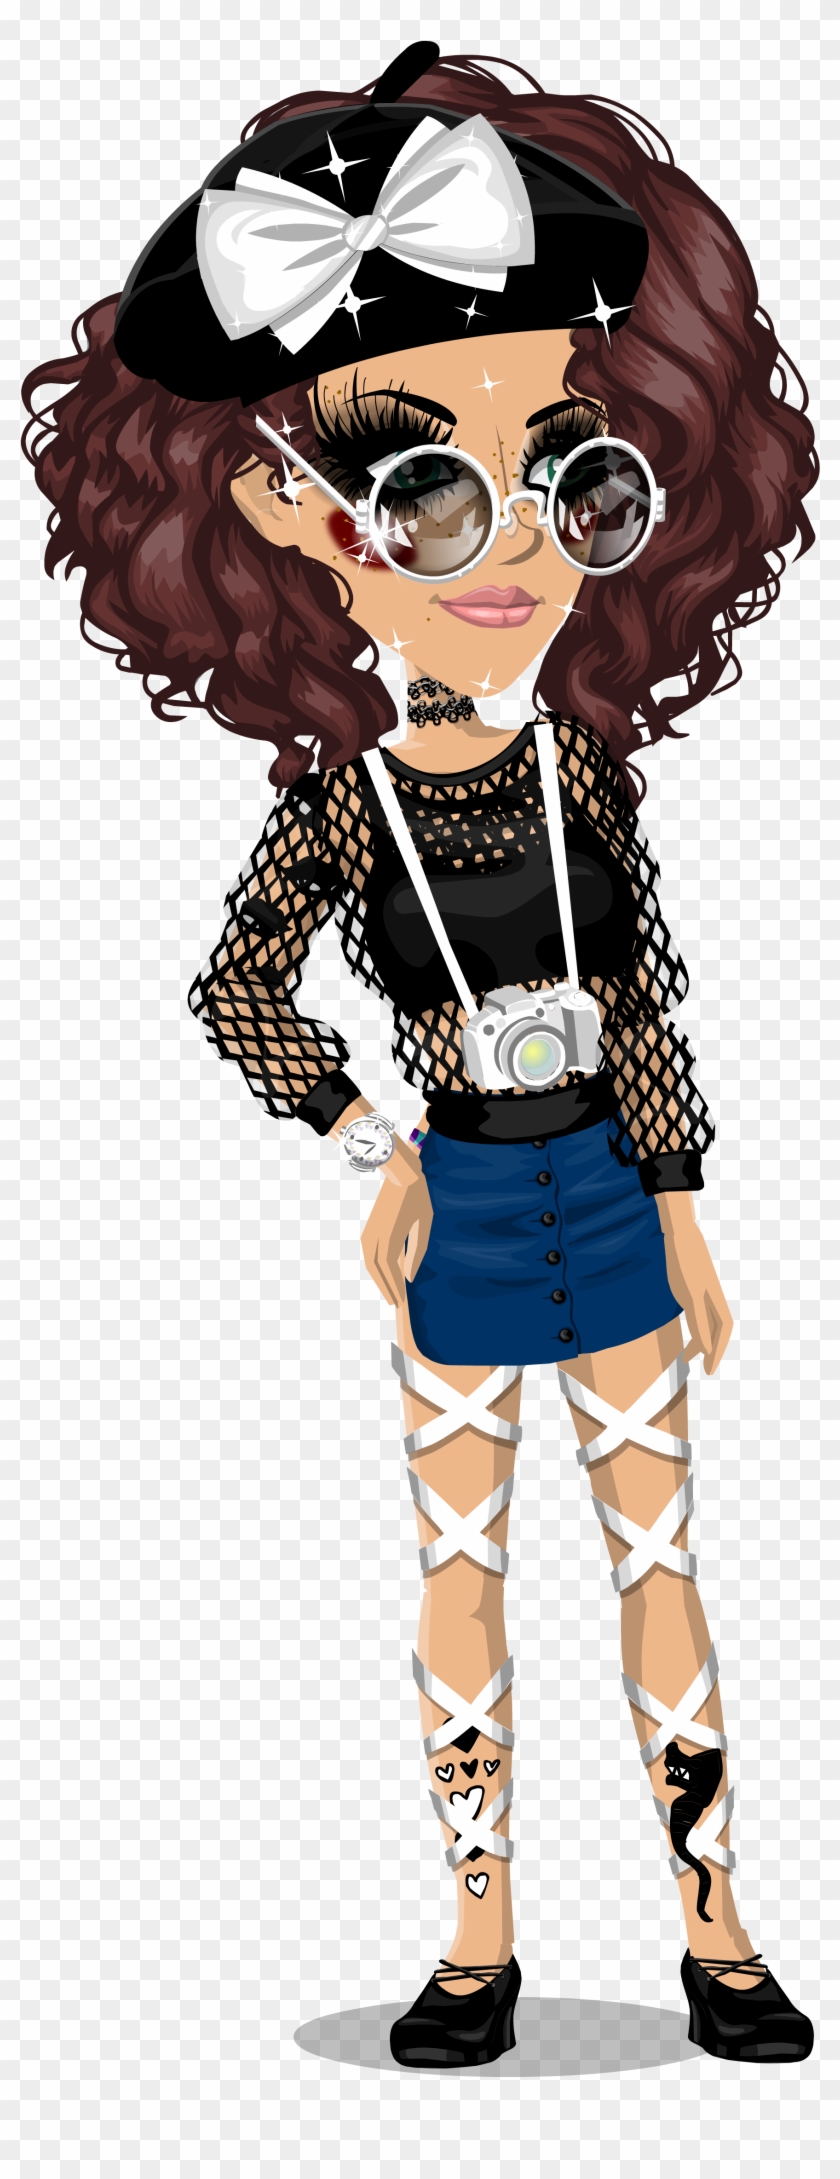 Fancy Aesthetic - Aesthetic Msp Characters Transparent Clipart #5812602